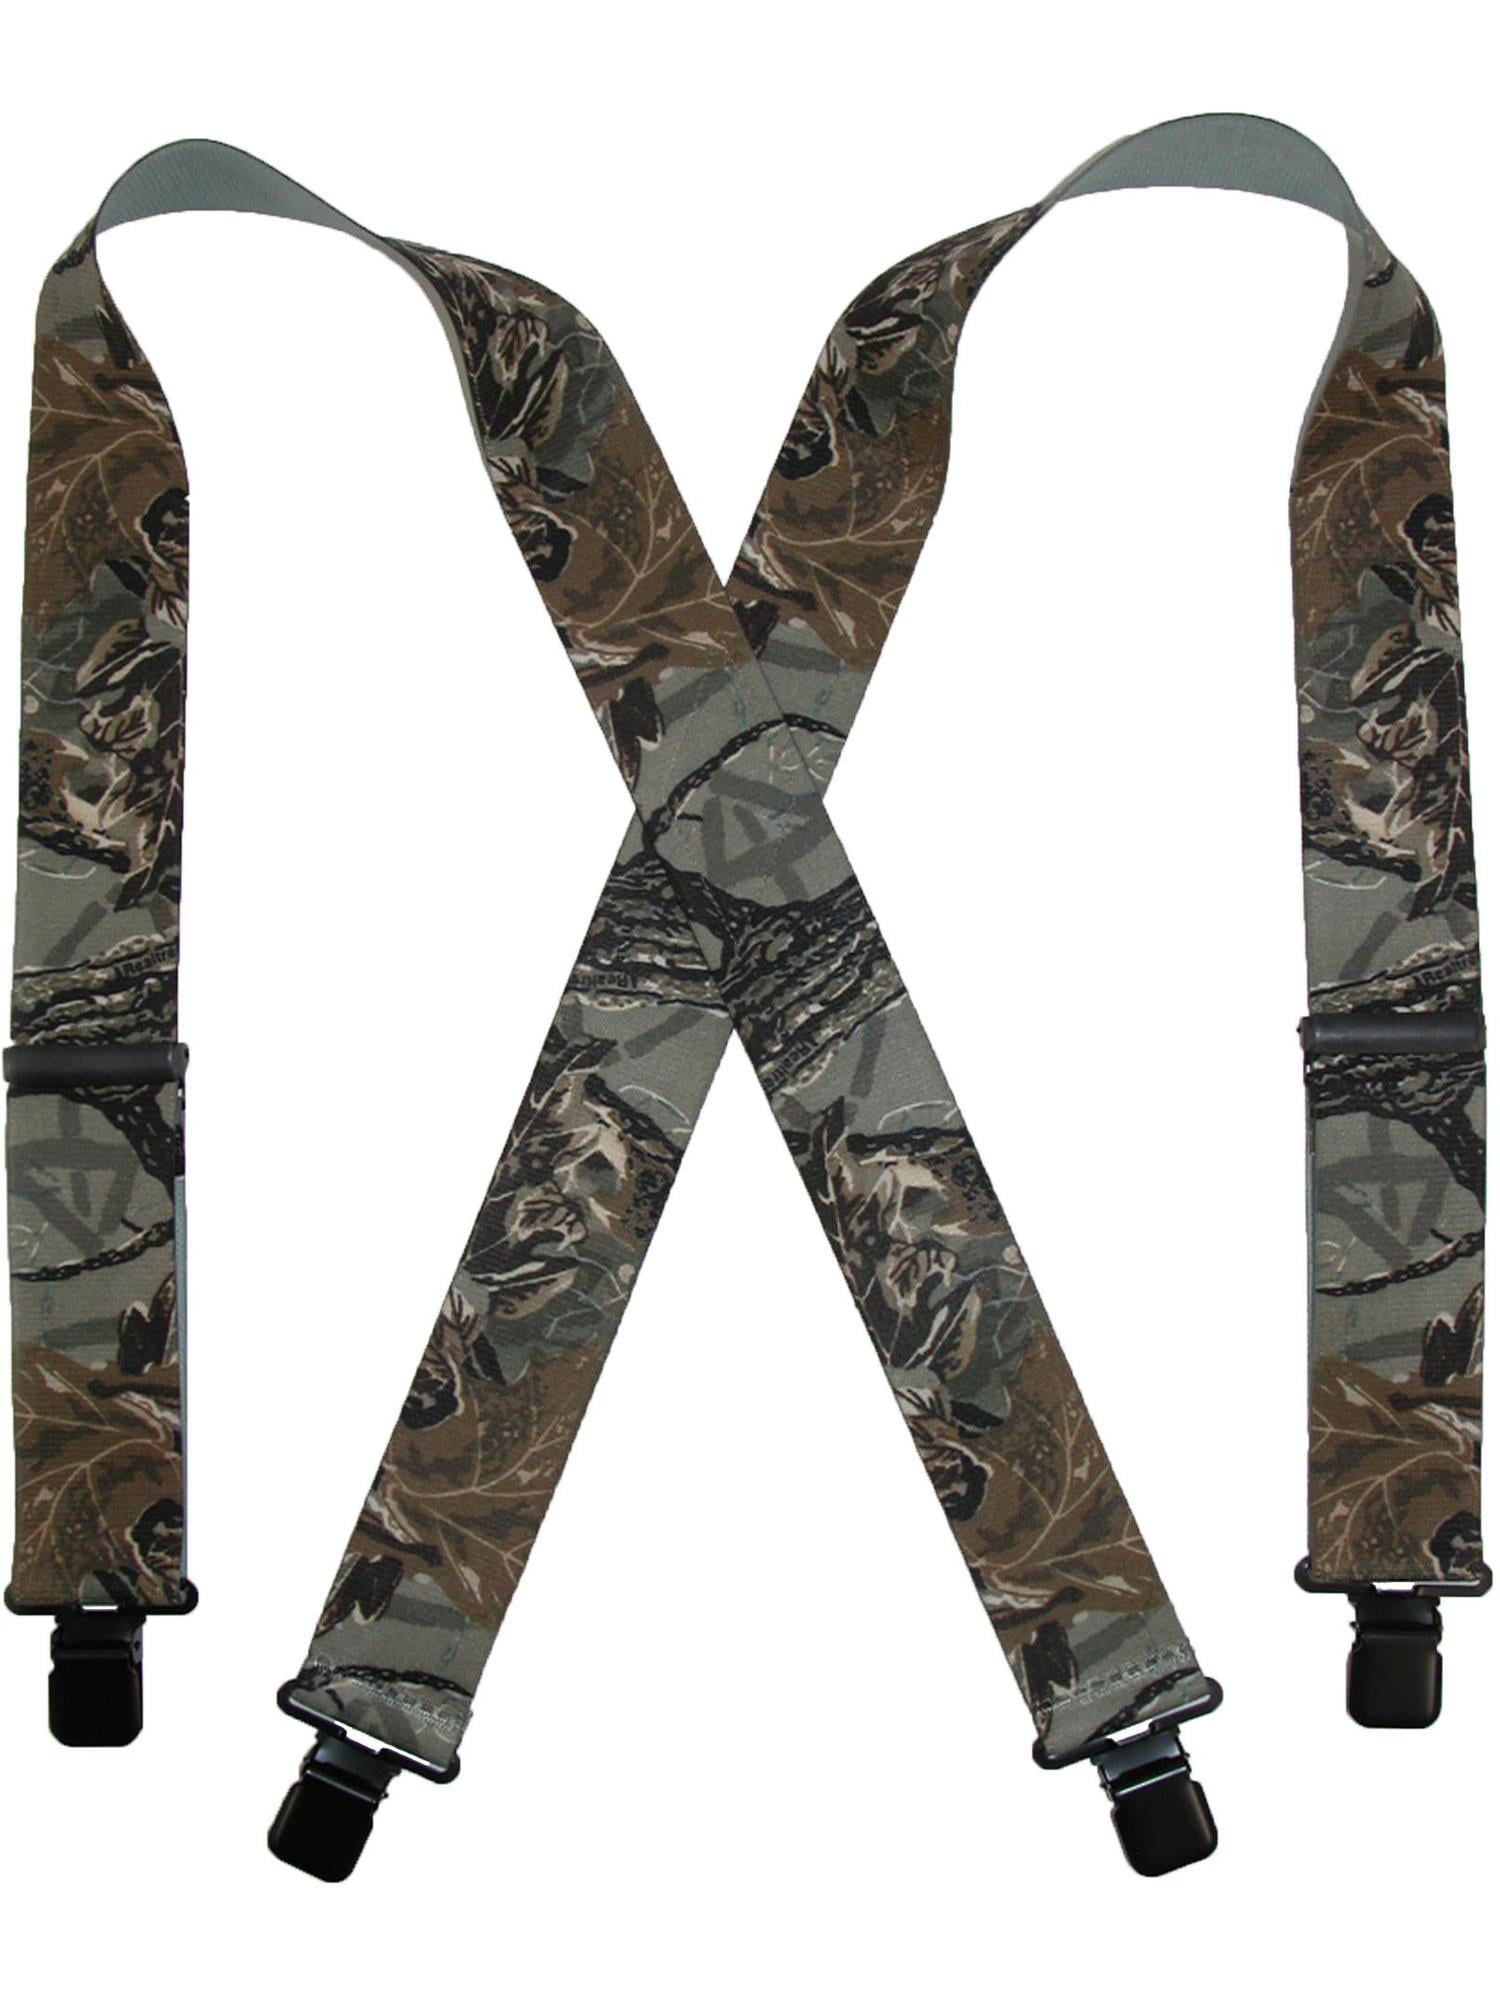 ORANGE CAMO American Made Custom Suspenders 2" Wide with Metal Clips CAMOUFLAGE 